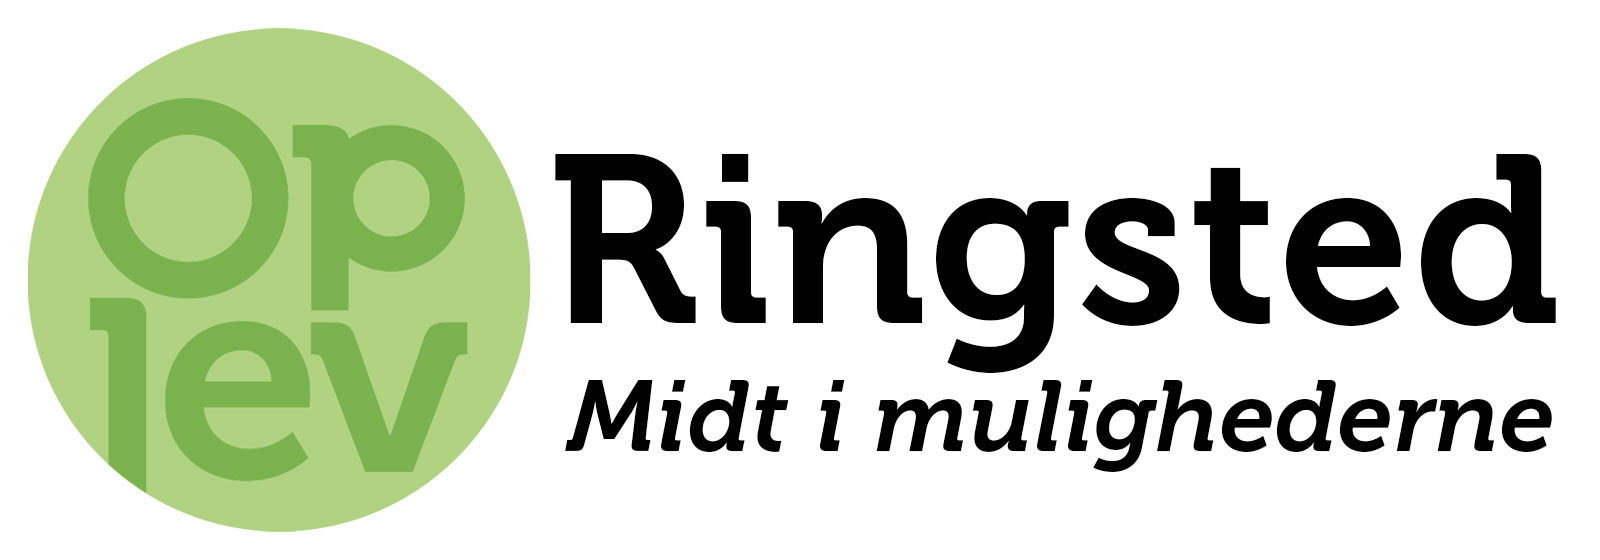 Oplev Ringsted